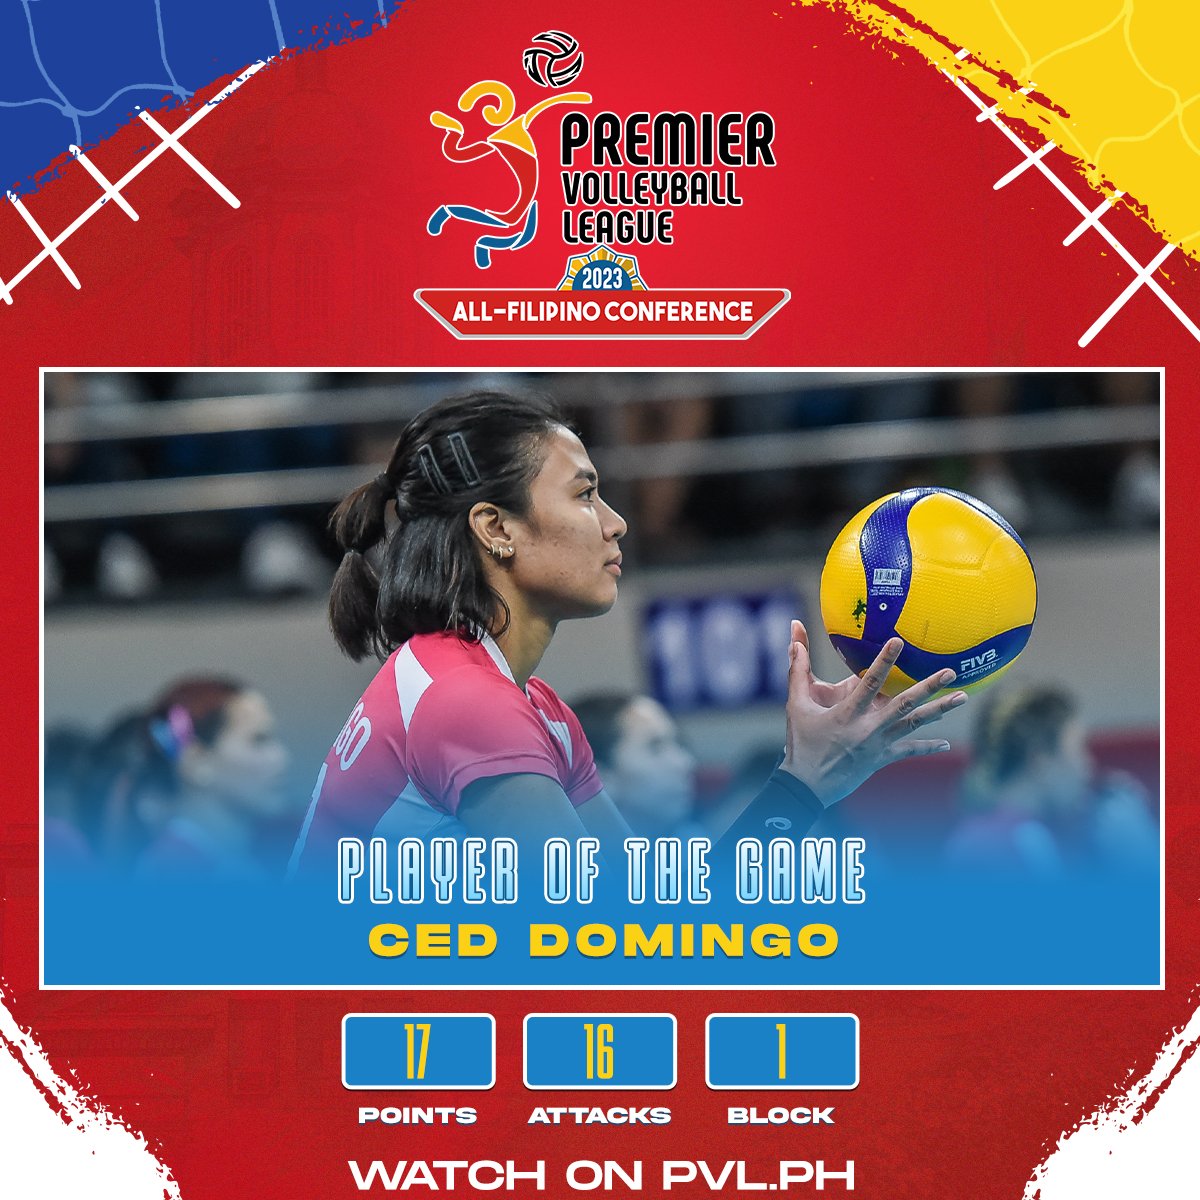 CED STEPS UP! #PVL2023 #TheHeartOfVolleyball Catch the game on PVL.ph, One Sports, One Sports+ or Cignal Play